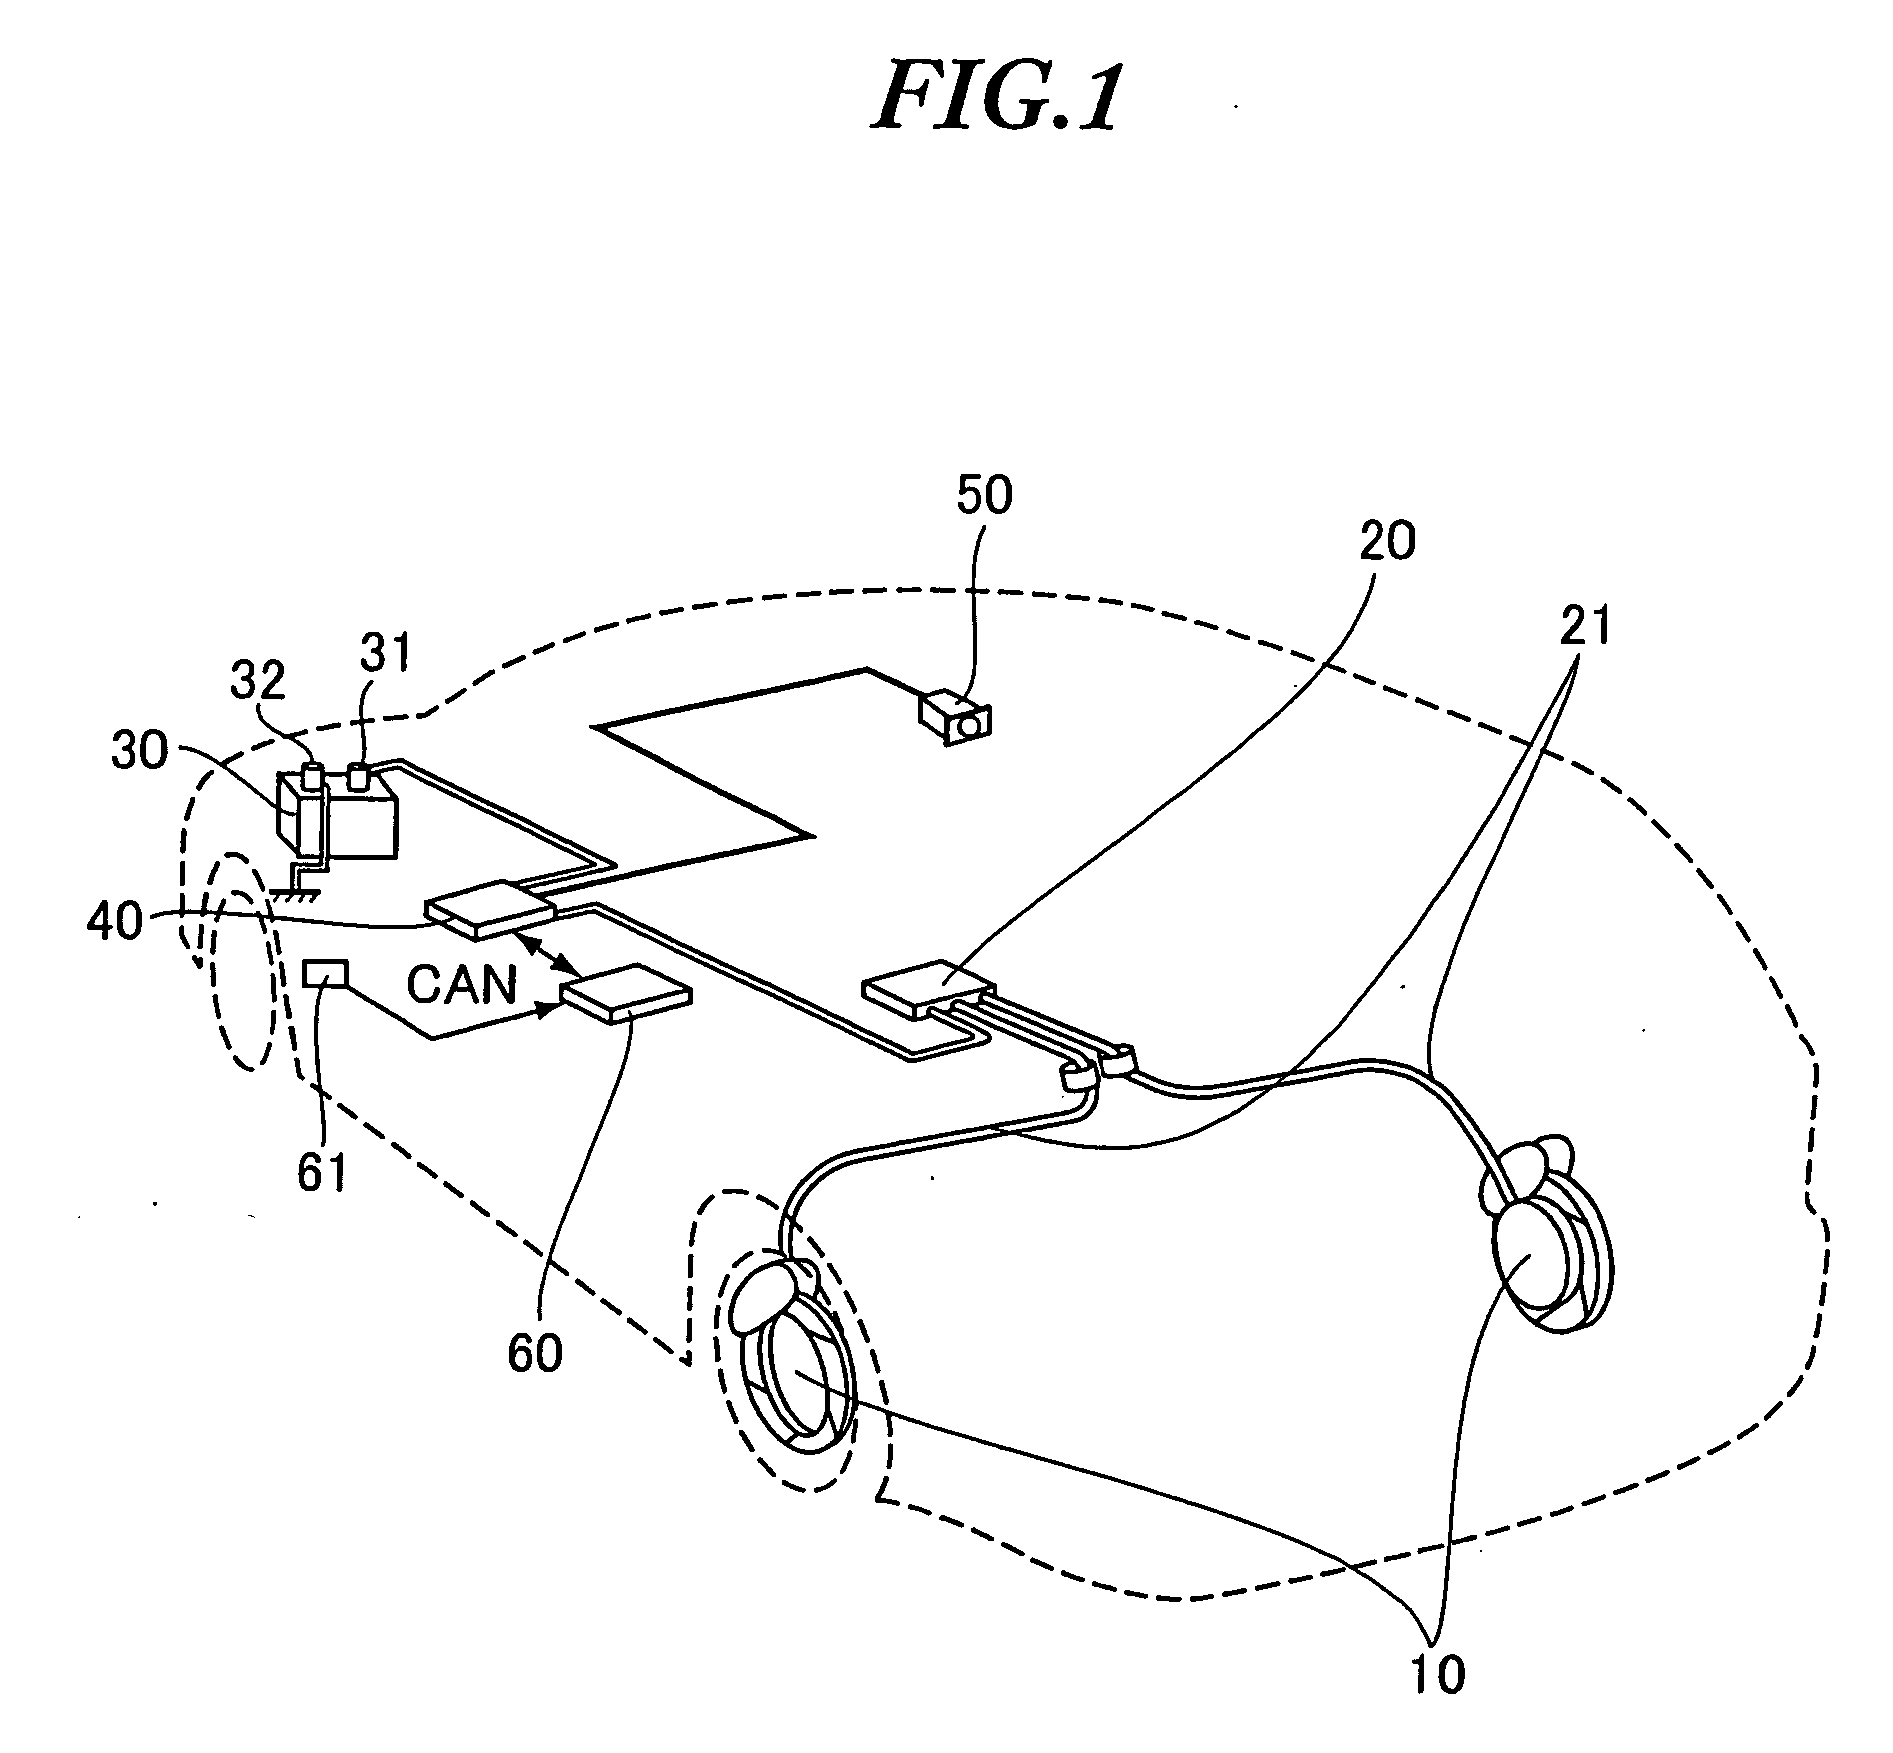 Stop determination apparatus, inclination determination apparatus, and electric parking brake controller